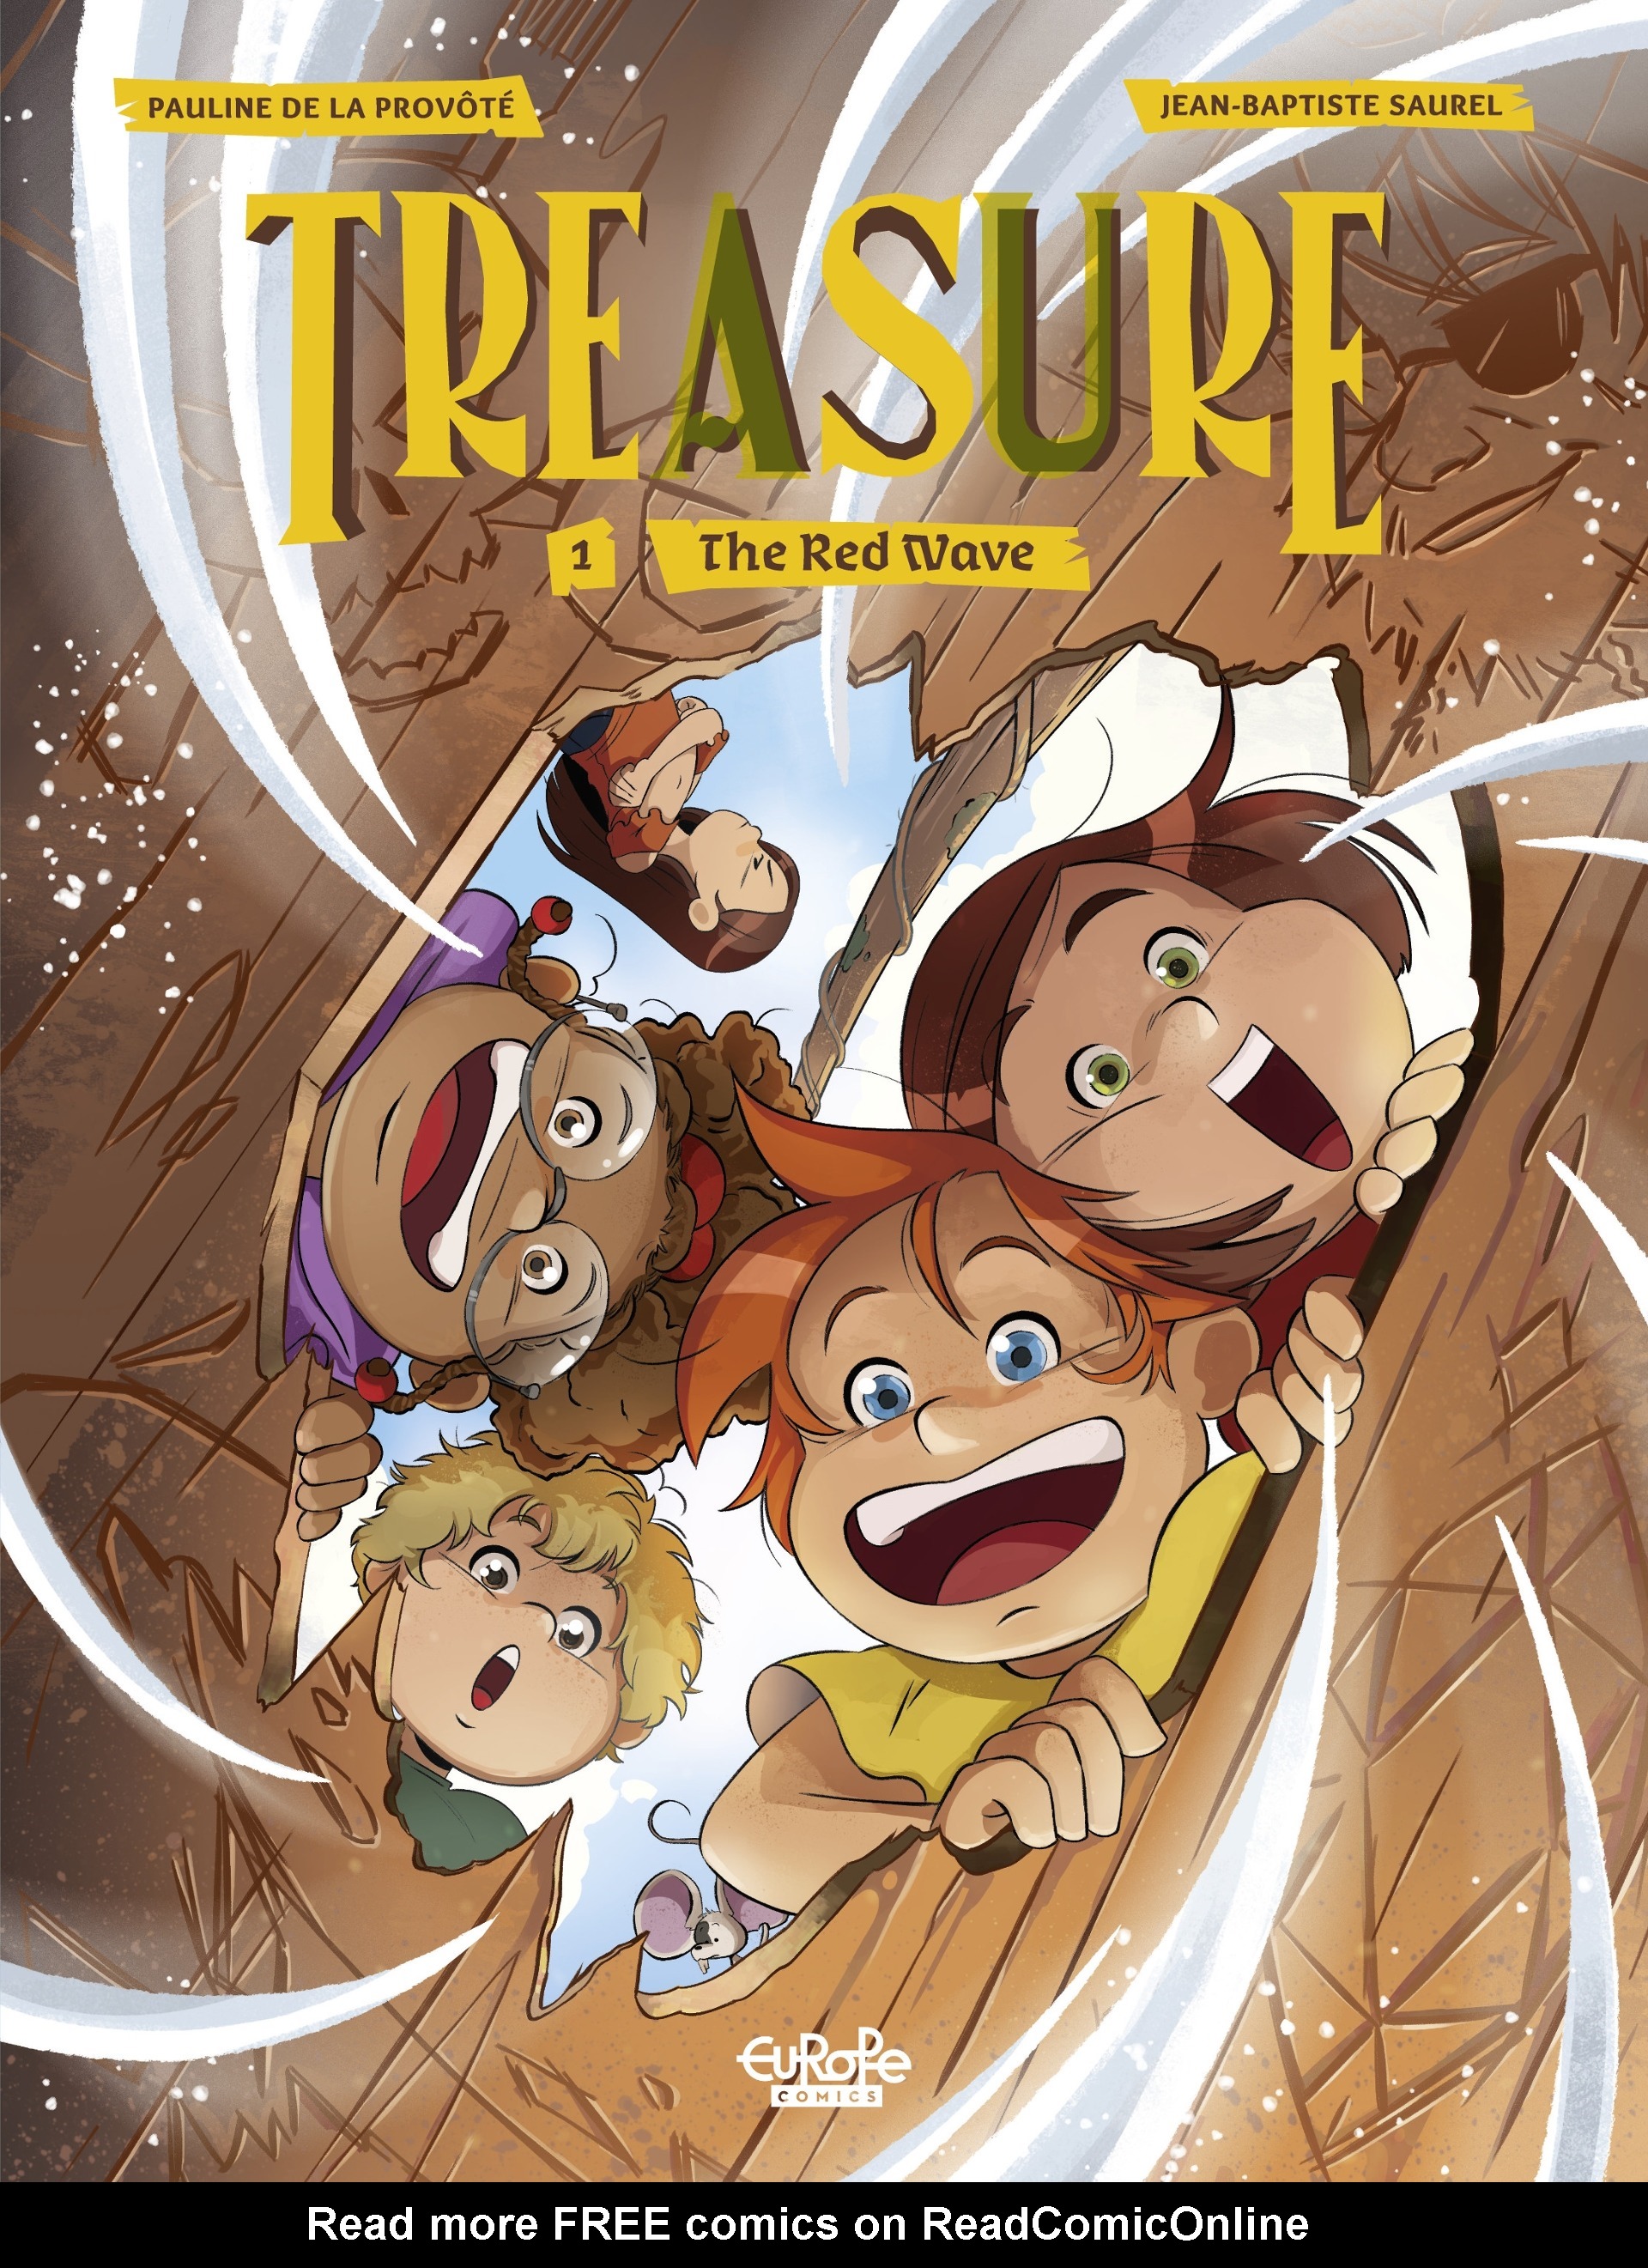 Read online Treasure: The Red Wave comic -  Issue # TPB - 1